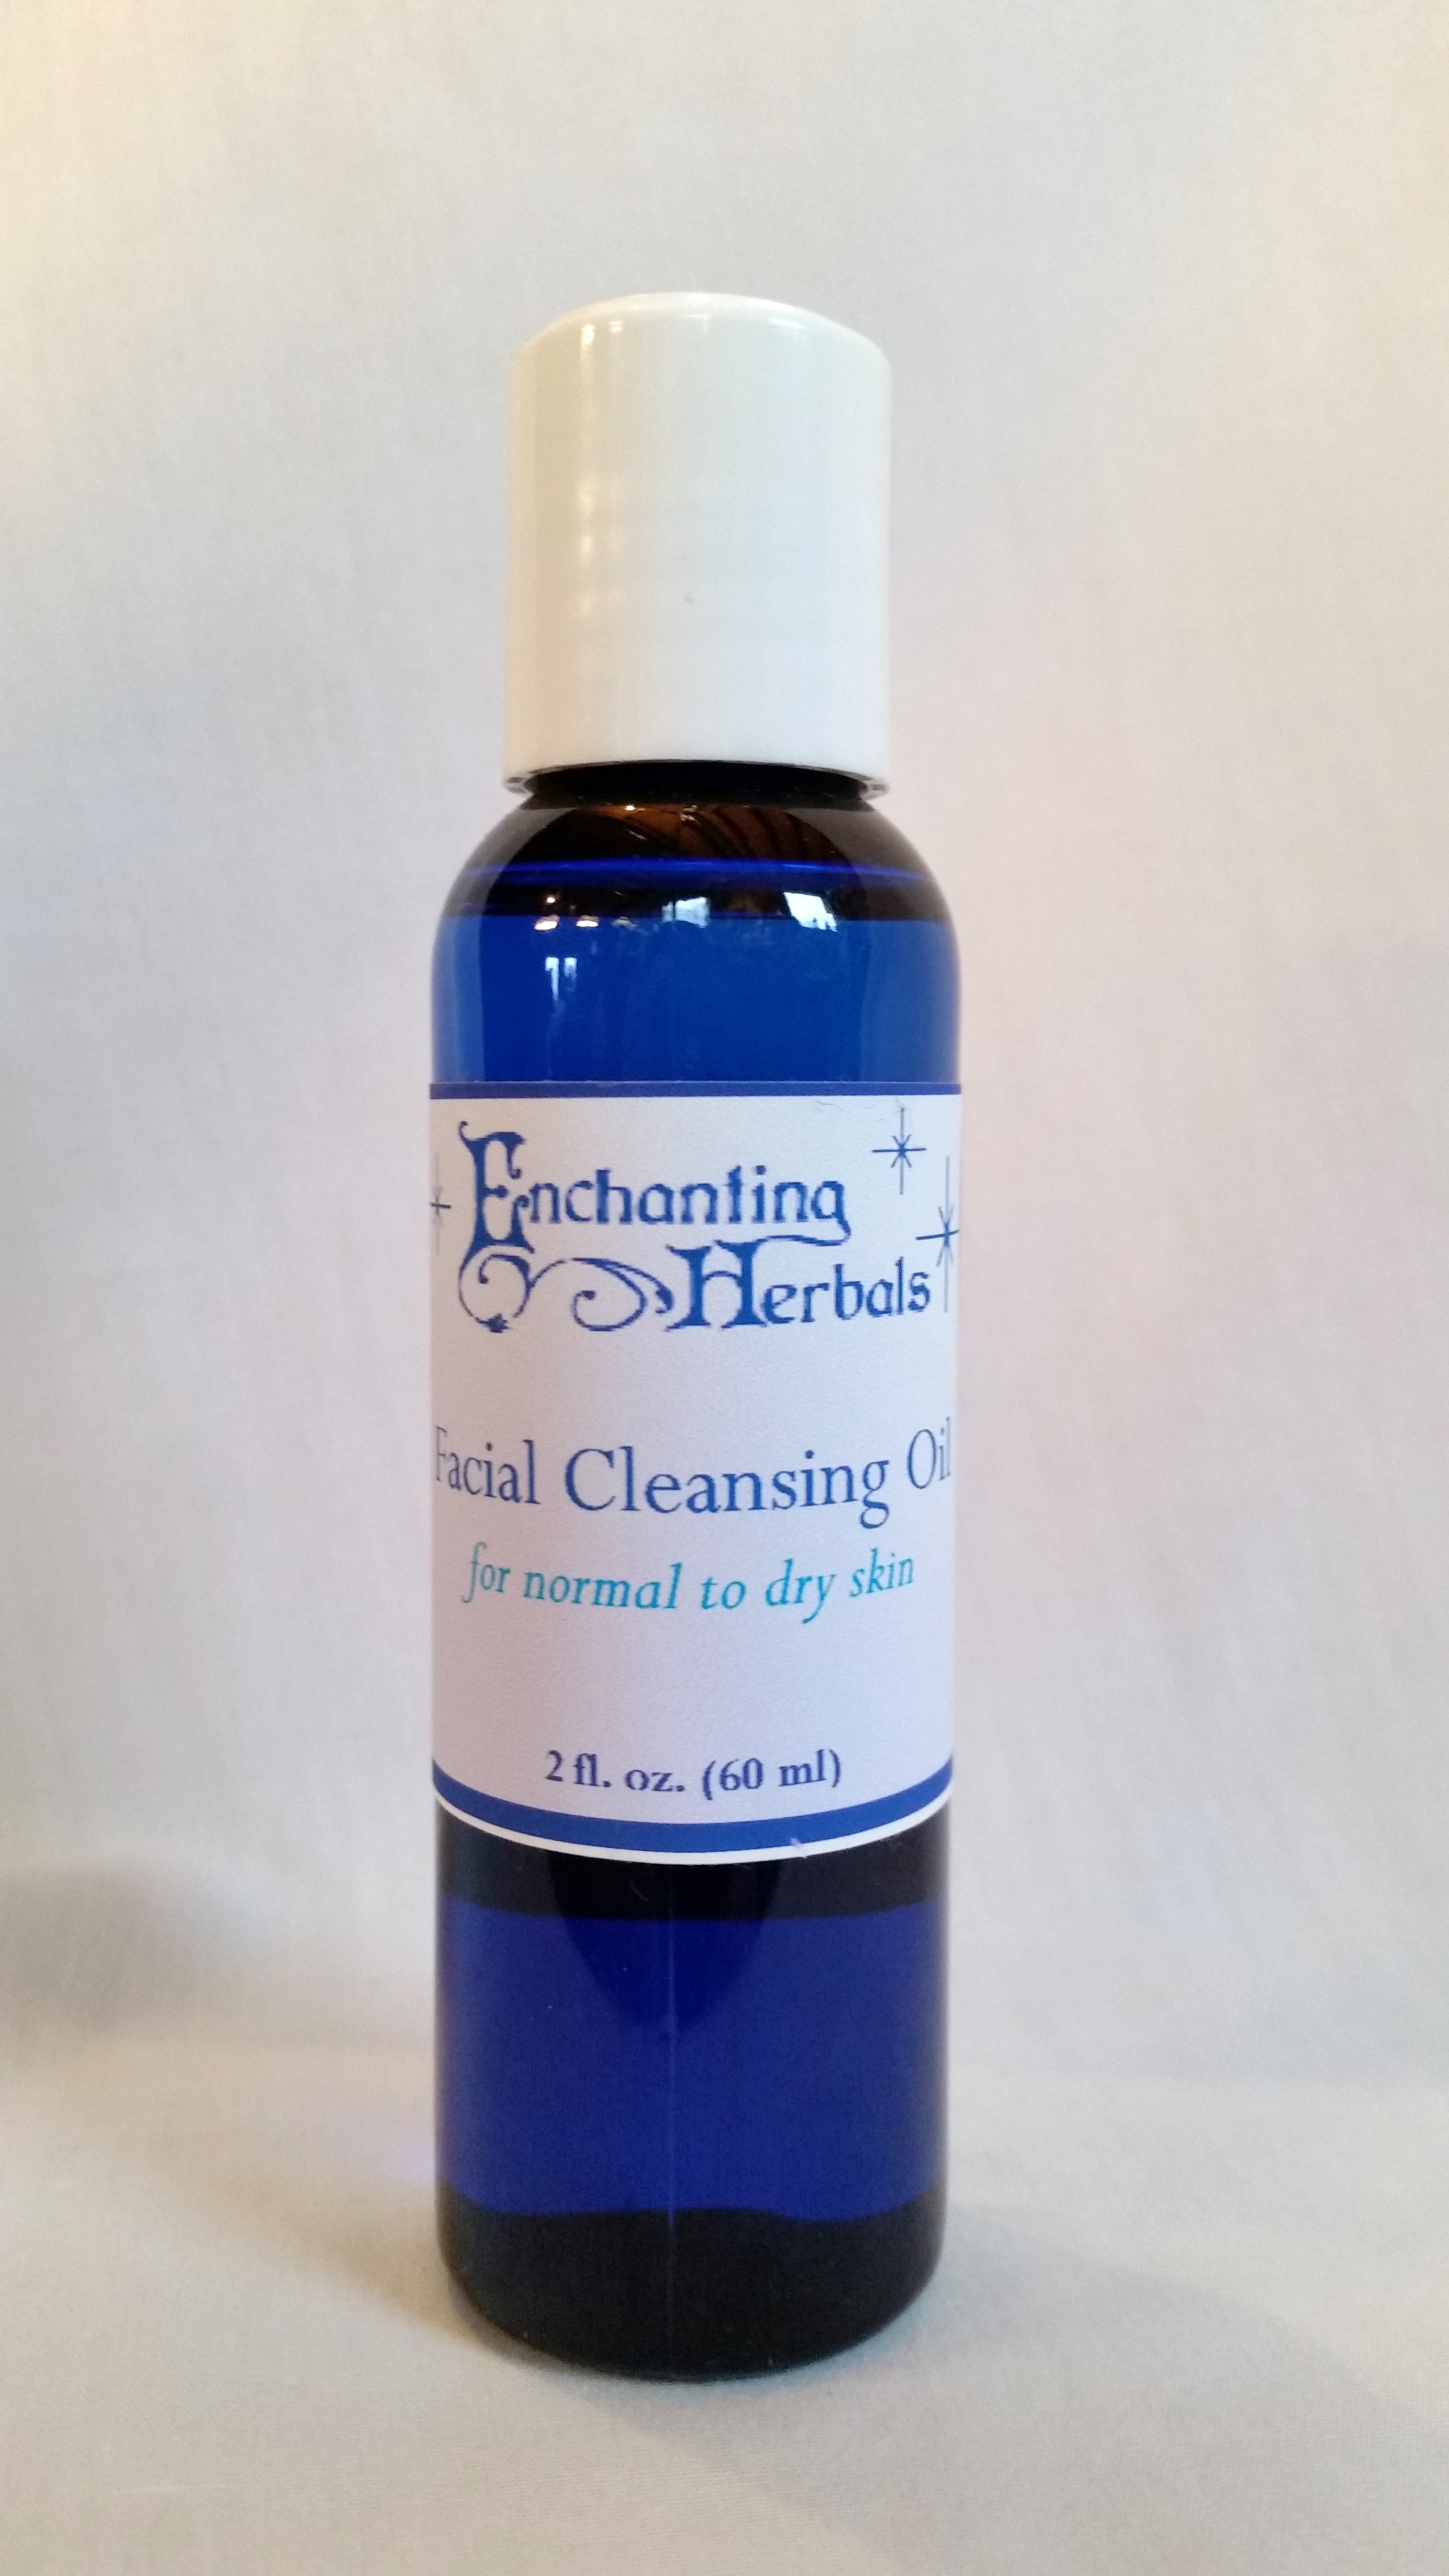 Facial Cleansing Oil ~ normal to dry